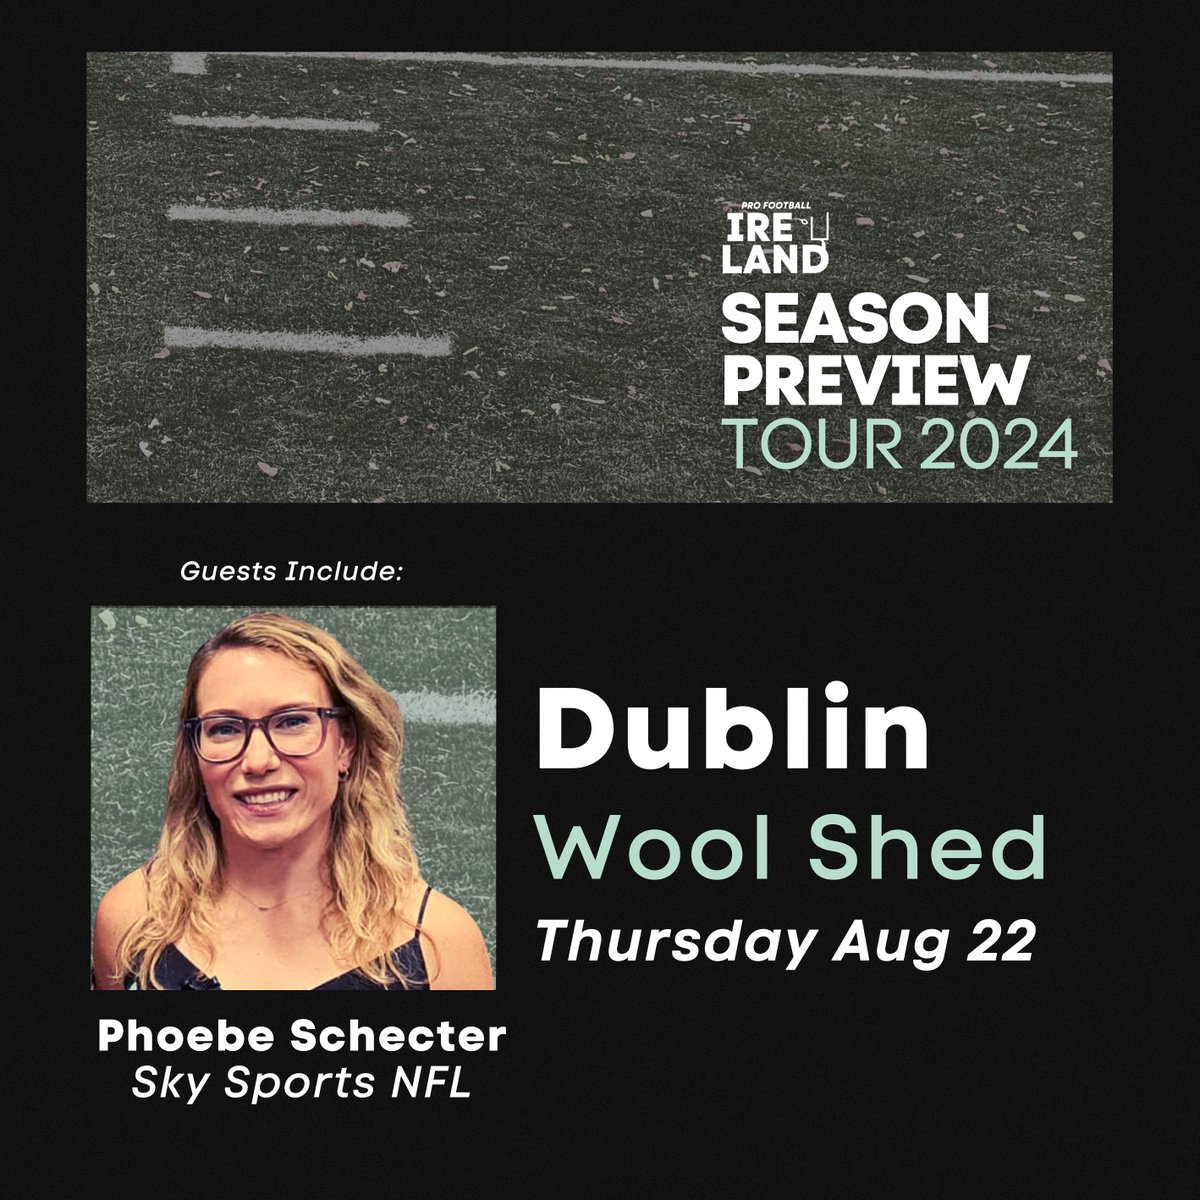 NFL fans in DUBLIN! We are down to our last 17 tickets for @Phoebe_Schecter on Aug 22 - our big Season Preview night at @woolshedbaa! Additional guests TBA! Tickets: linktr.ee/nflireland